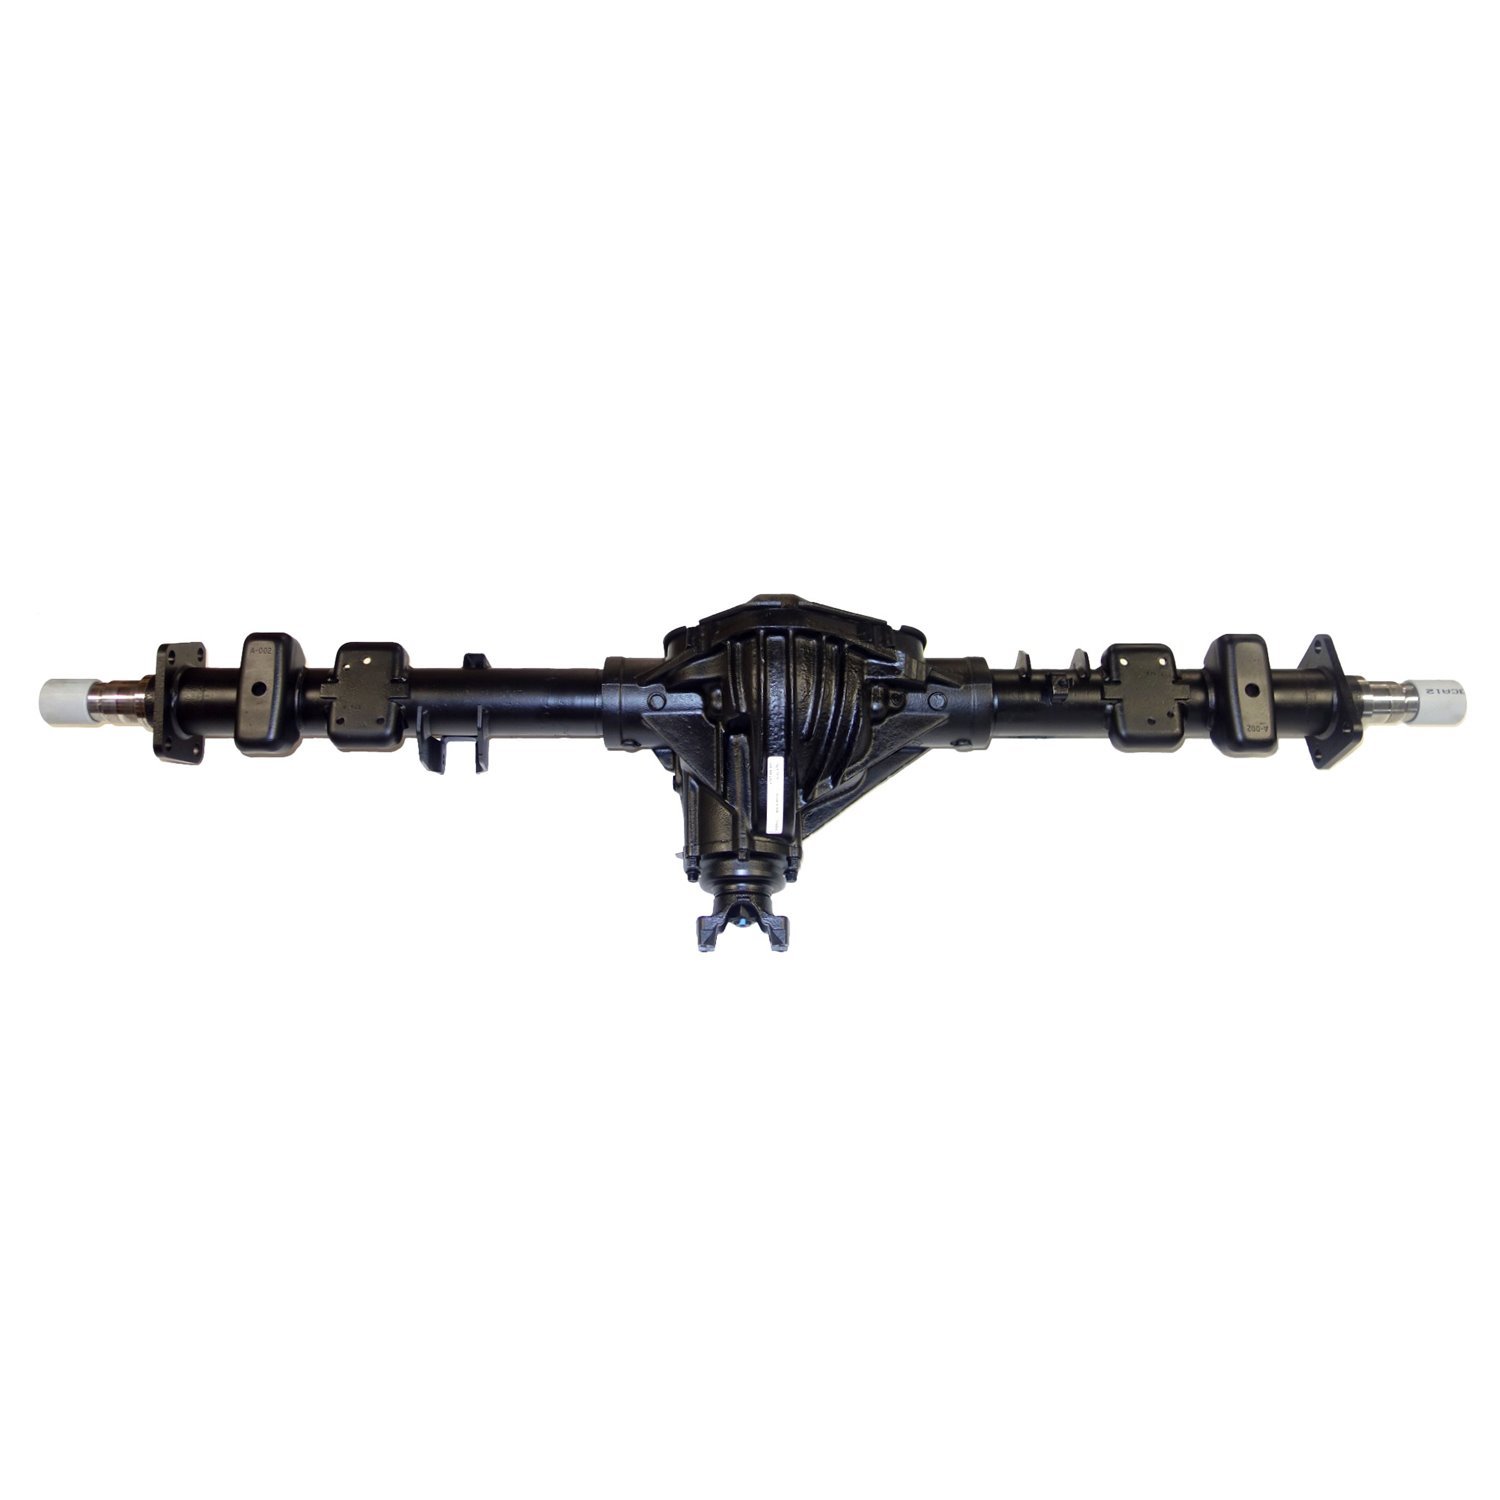 Remanufactured Complete Axle Assy for GM 14 Bolt Truck 90-00 GM 3500, SRW, Pickup 3.42